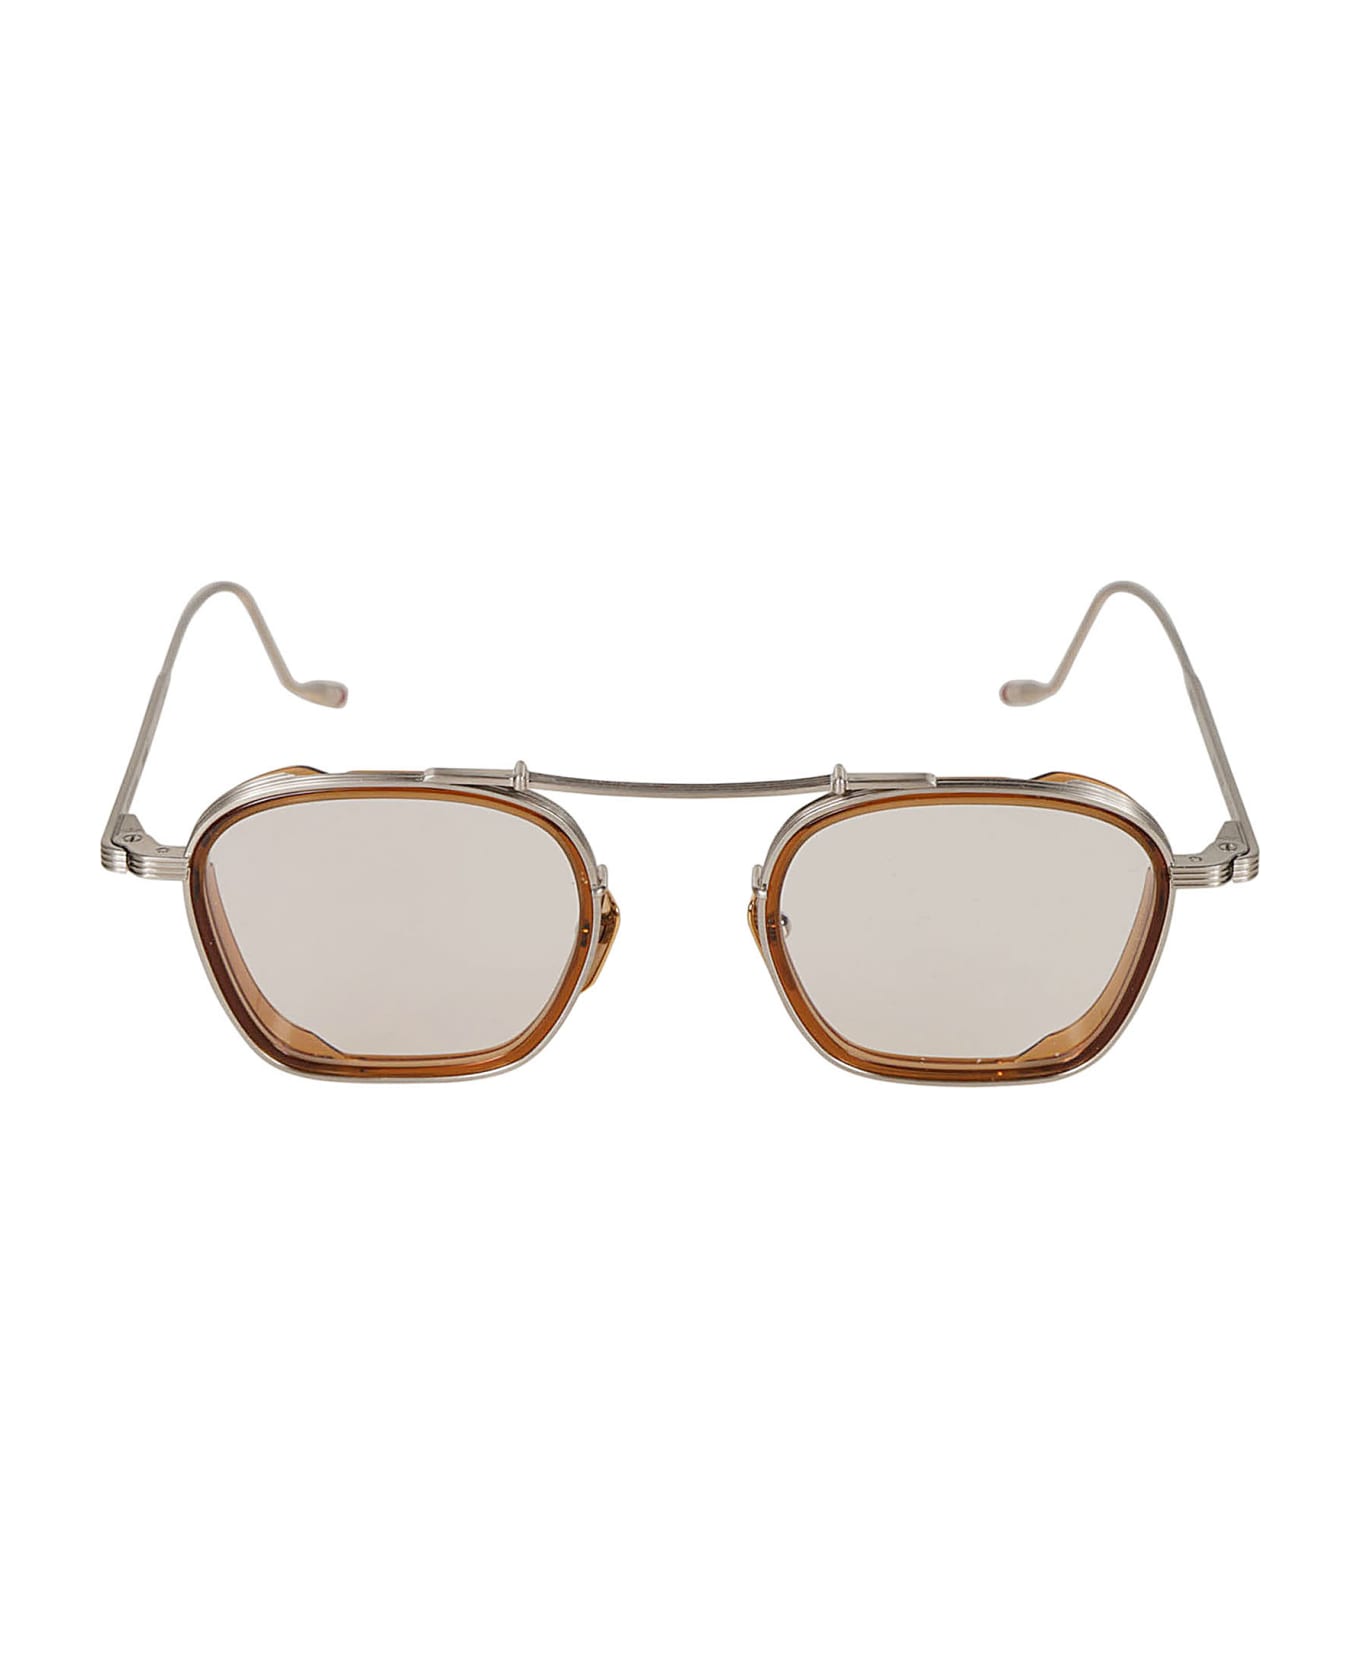 Jacques Marie Mage Baudelaire 2 Frame Glasses - Silver アイウェア